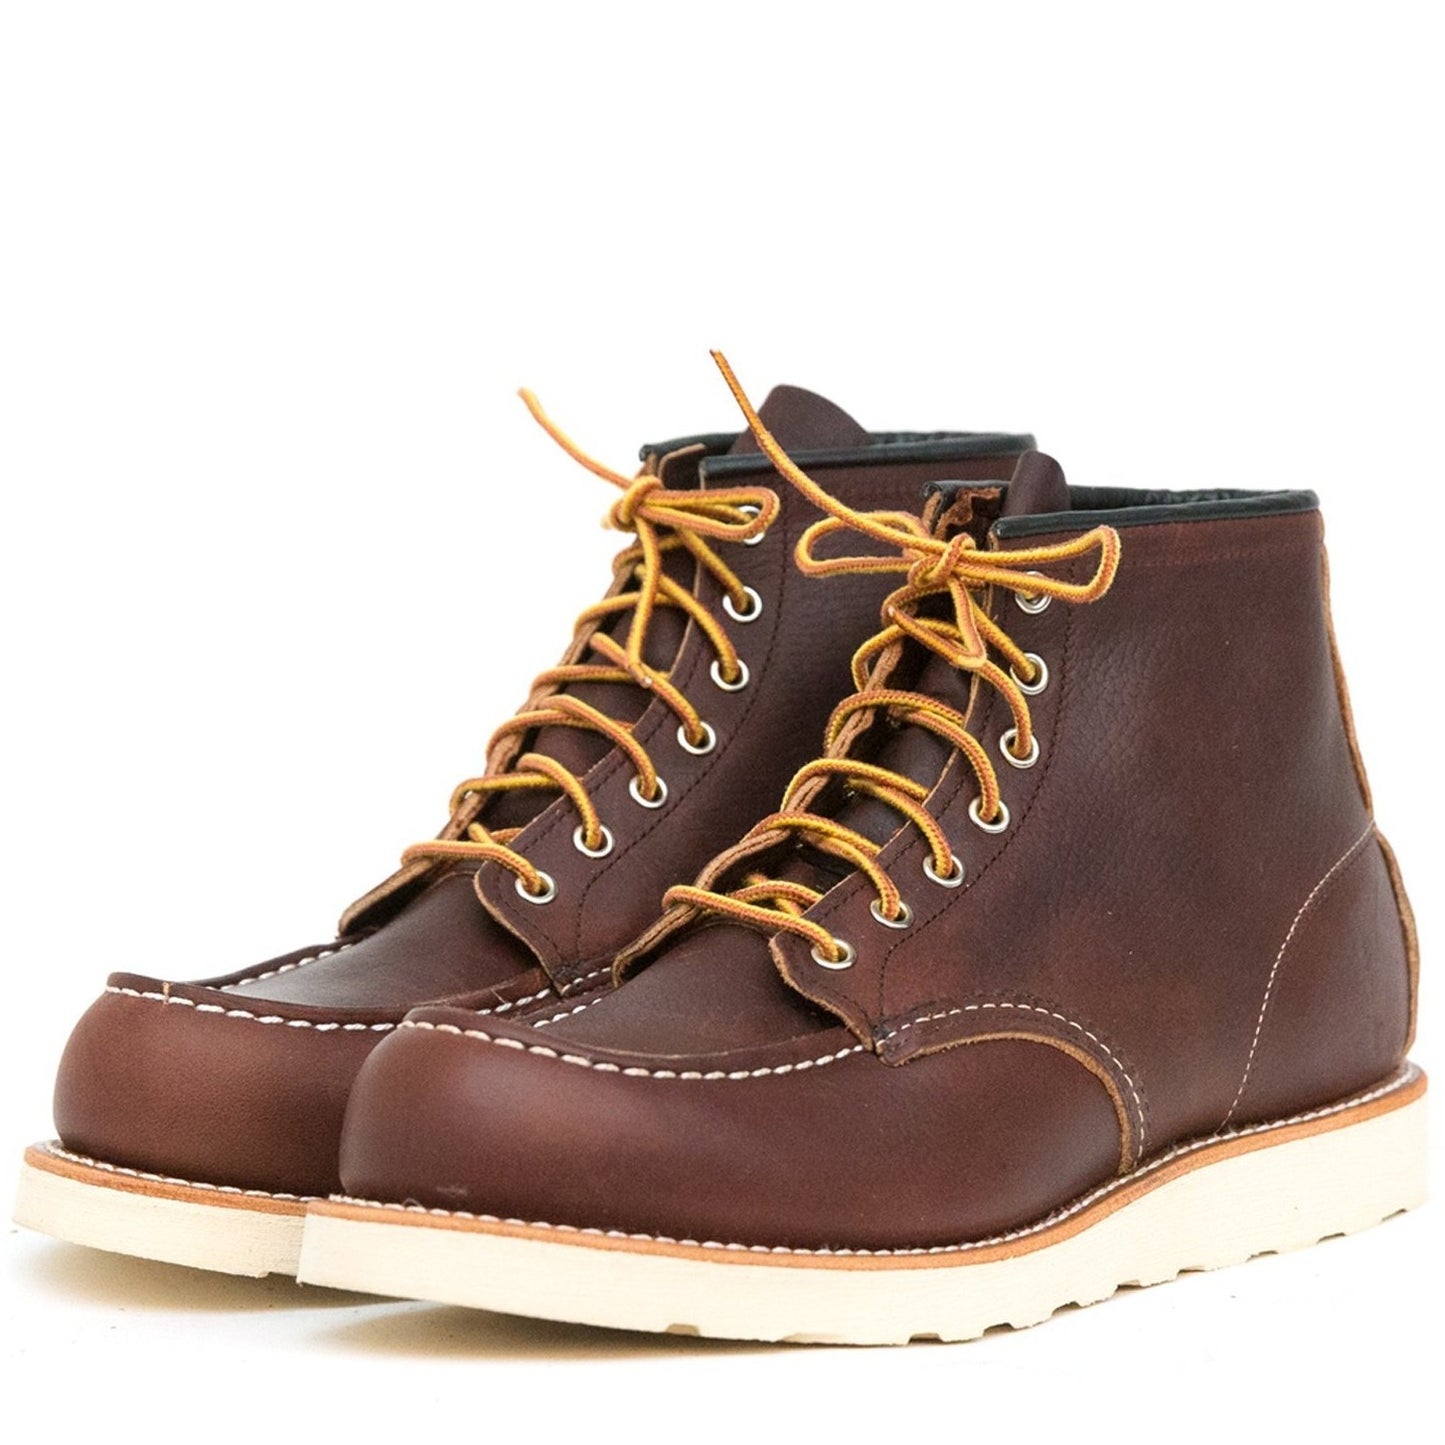 RED WING - 8138 Classic Moc The